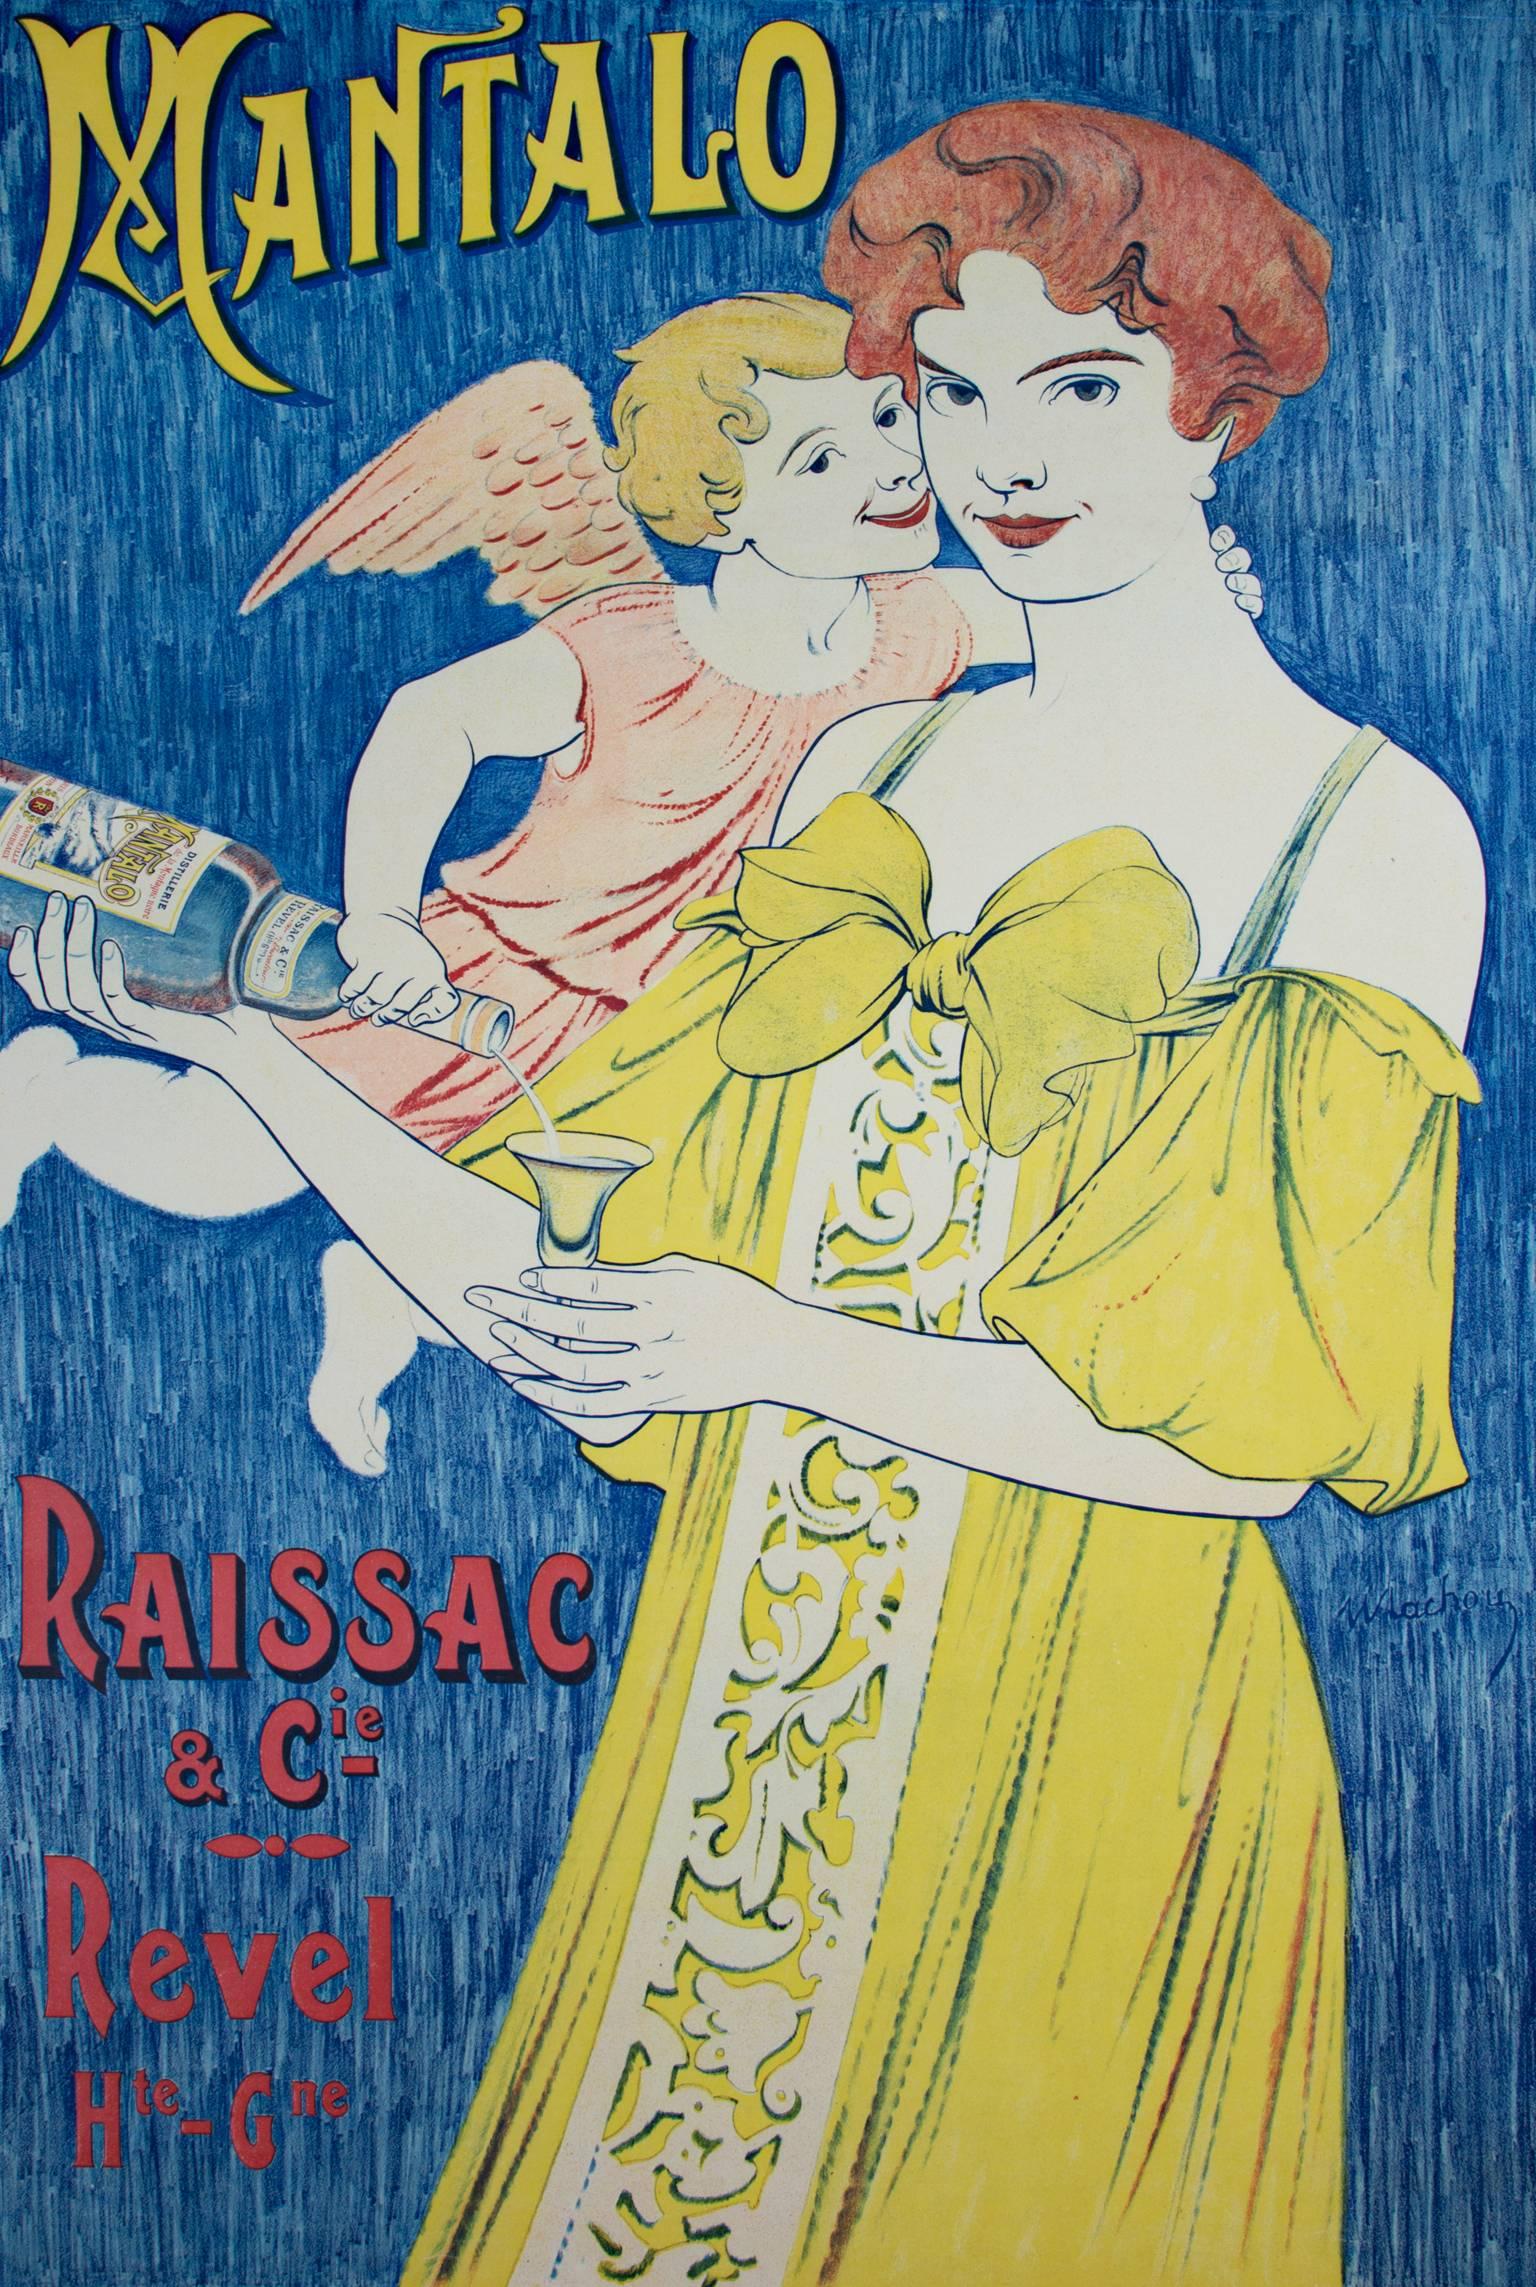 "Mantalo," an Original Lithograph Poster signed by W. Lachou